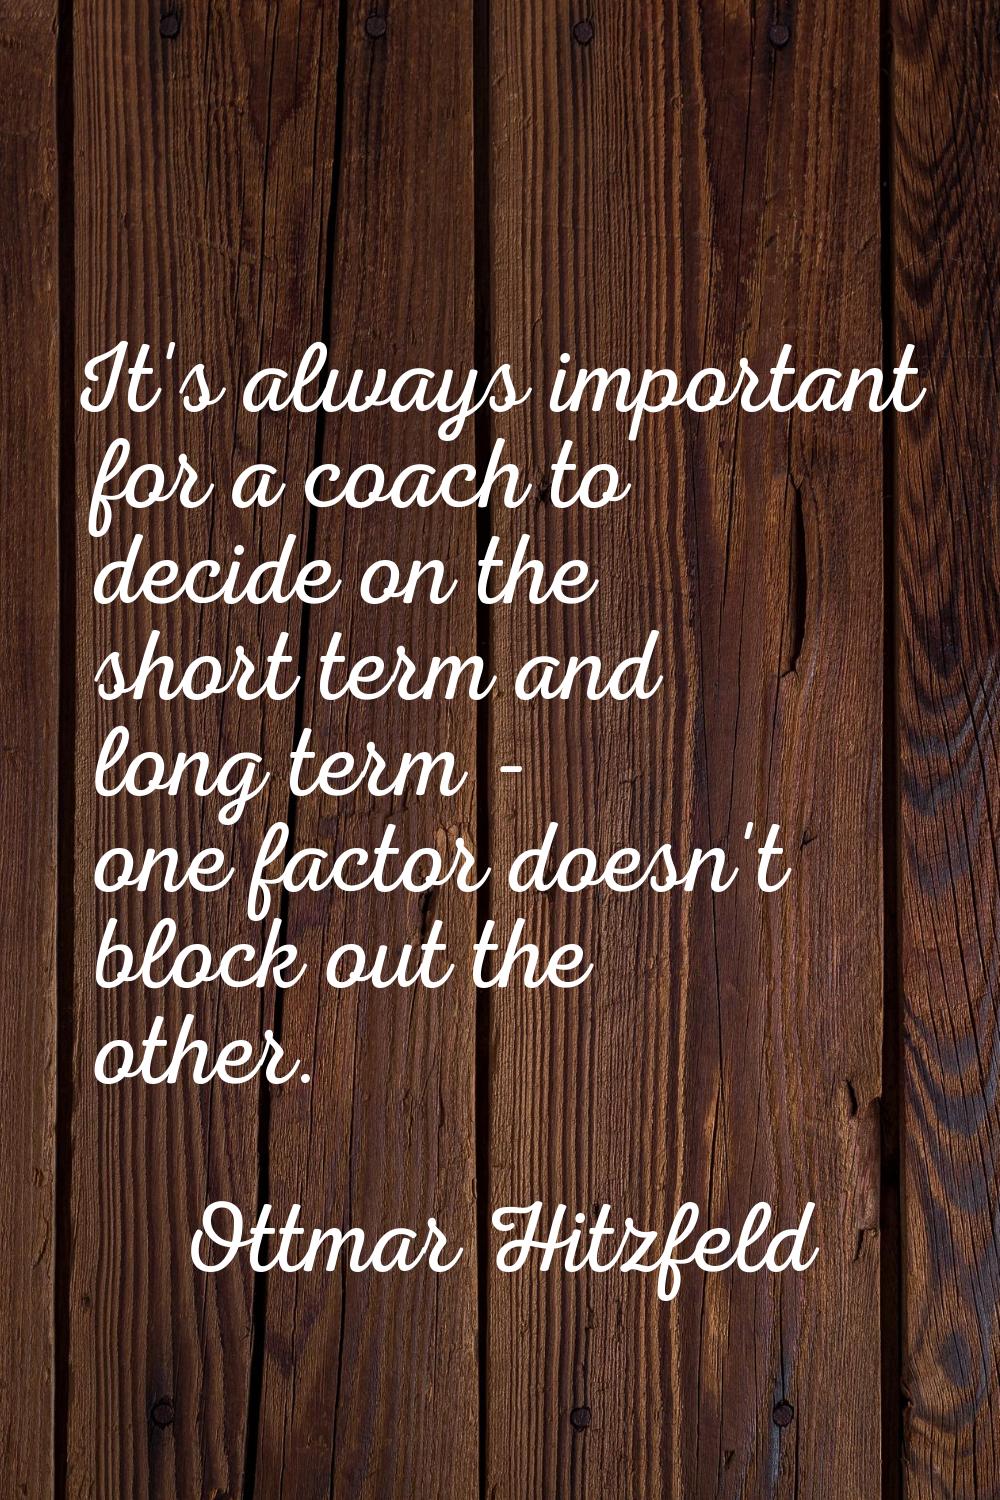 It's always important for a coach to decide on the short term and long term - one factor doesn't bl